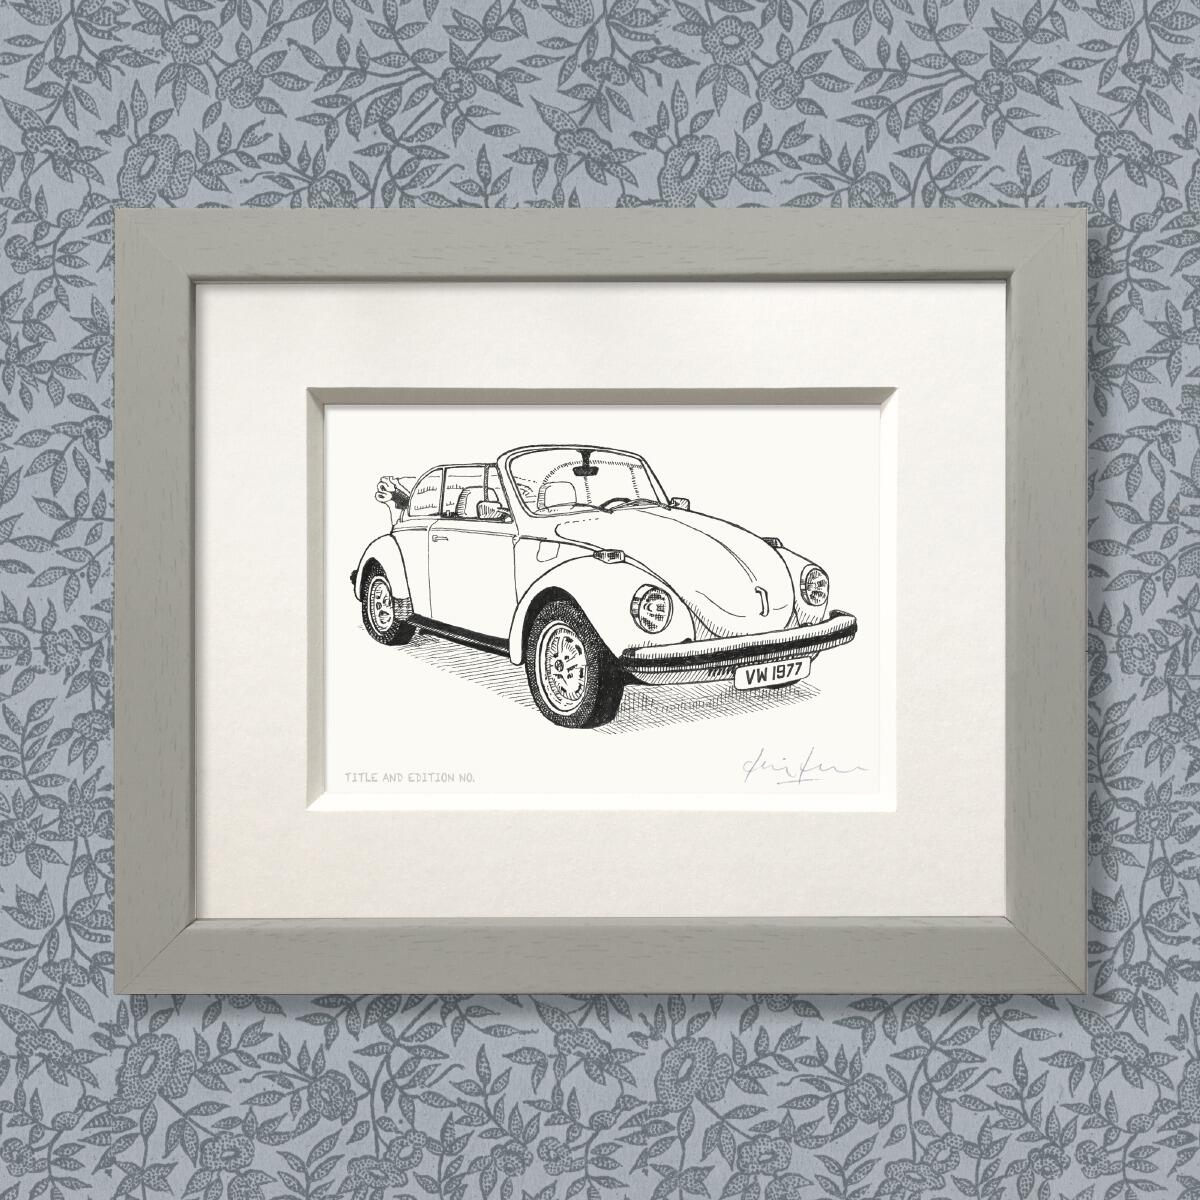 Limited edition print from pen and ink drawing of a 1977 soft-top VW Beetle in grey frame